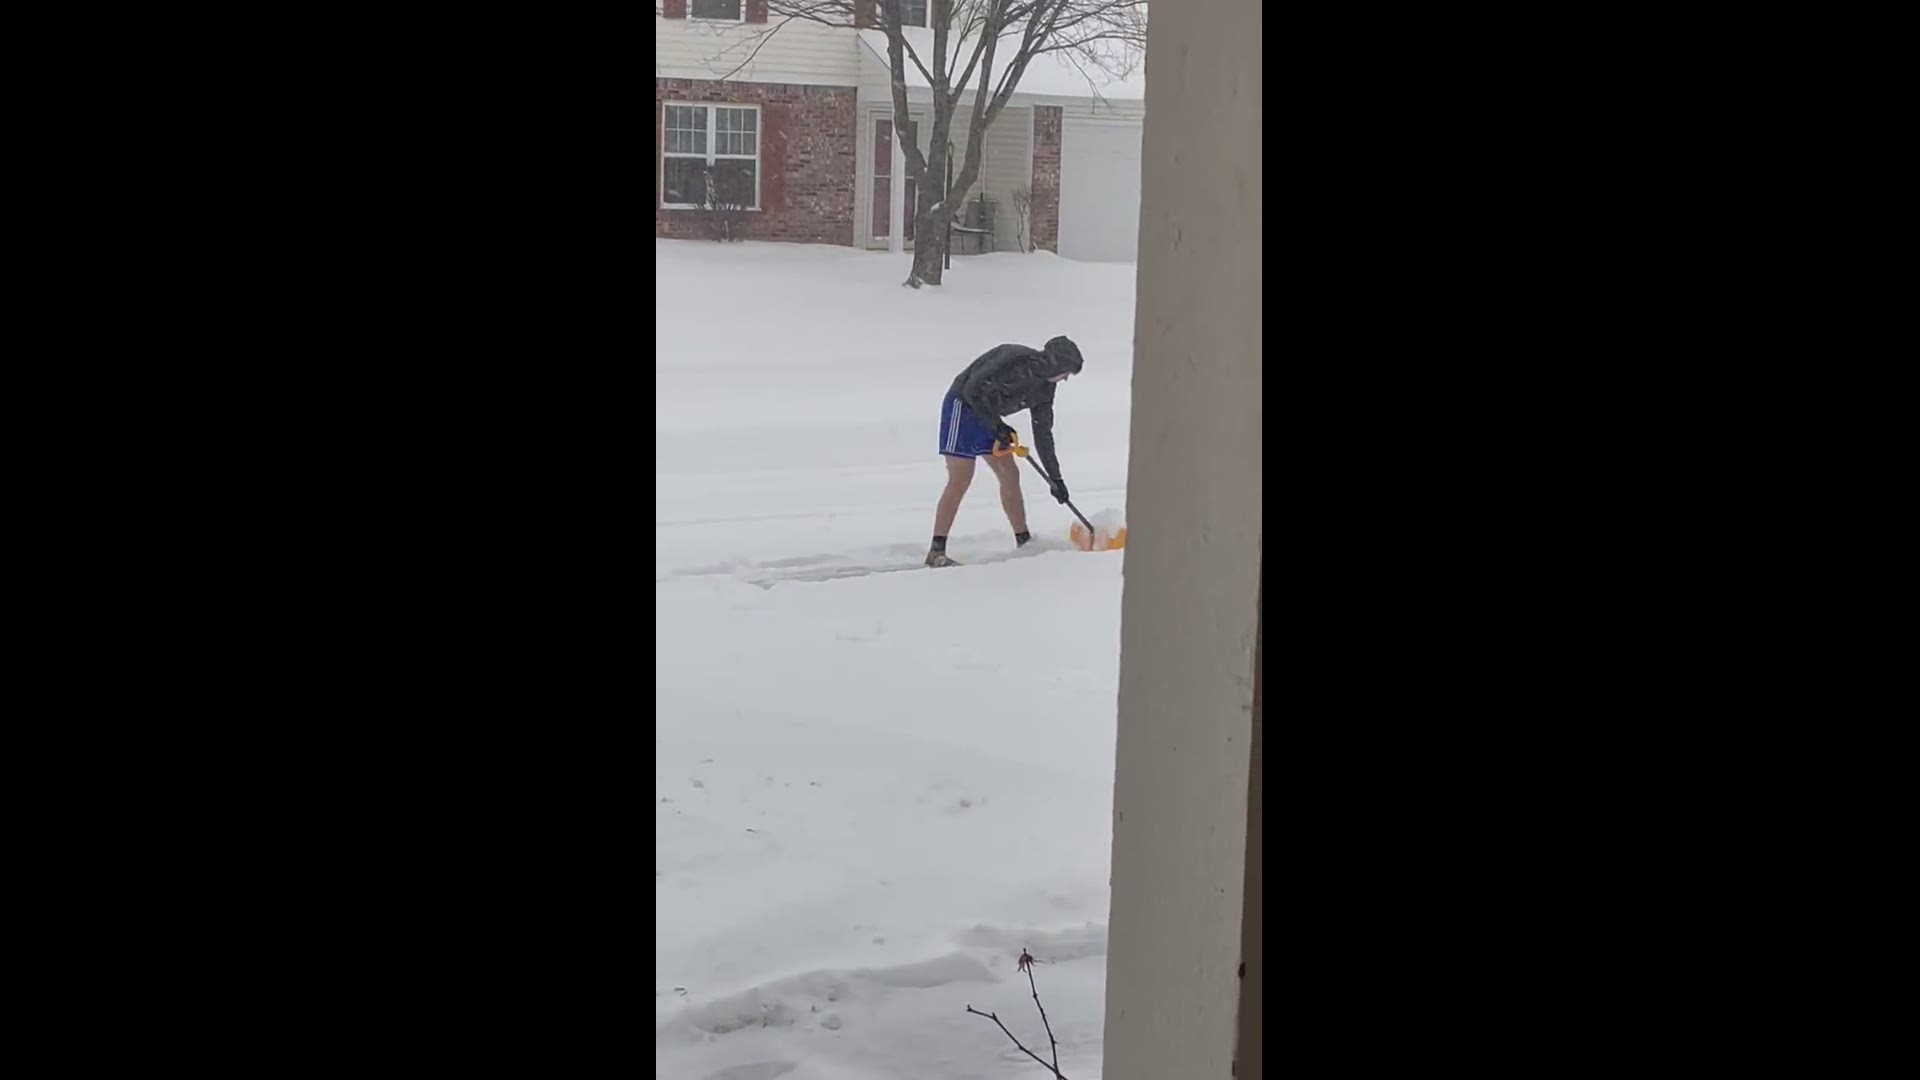 Shoveling snow in shorts in Indianapolis. Credit: Carolyn Holsapple
Credit: Carolyn Holsapple